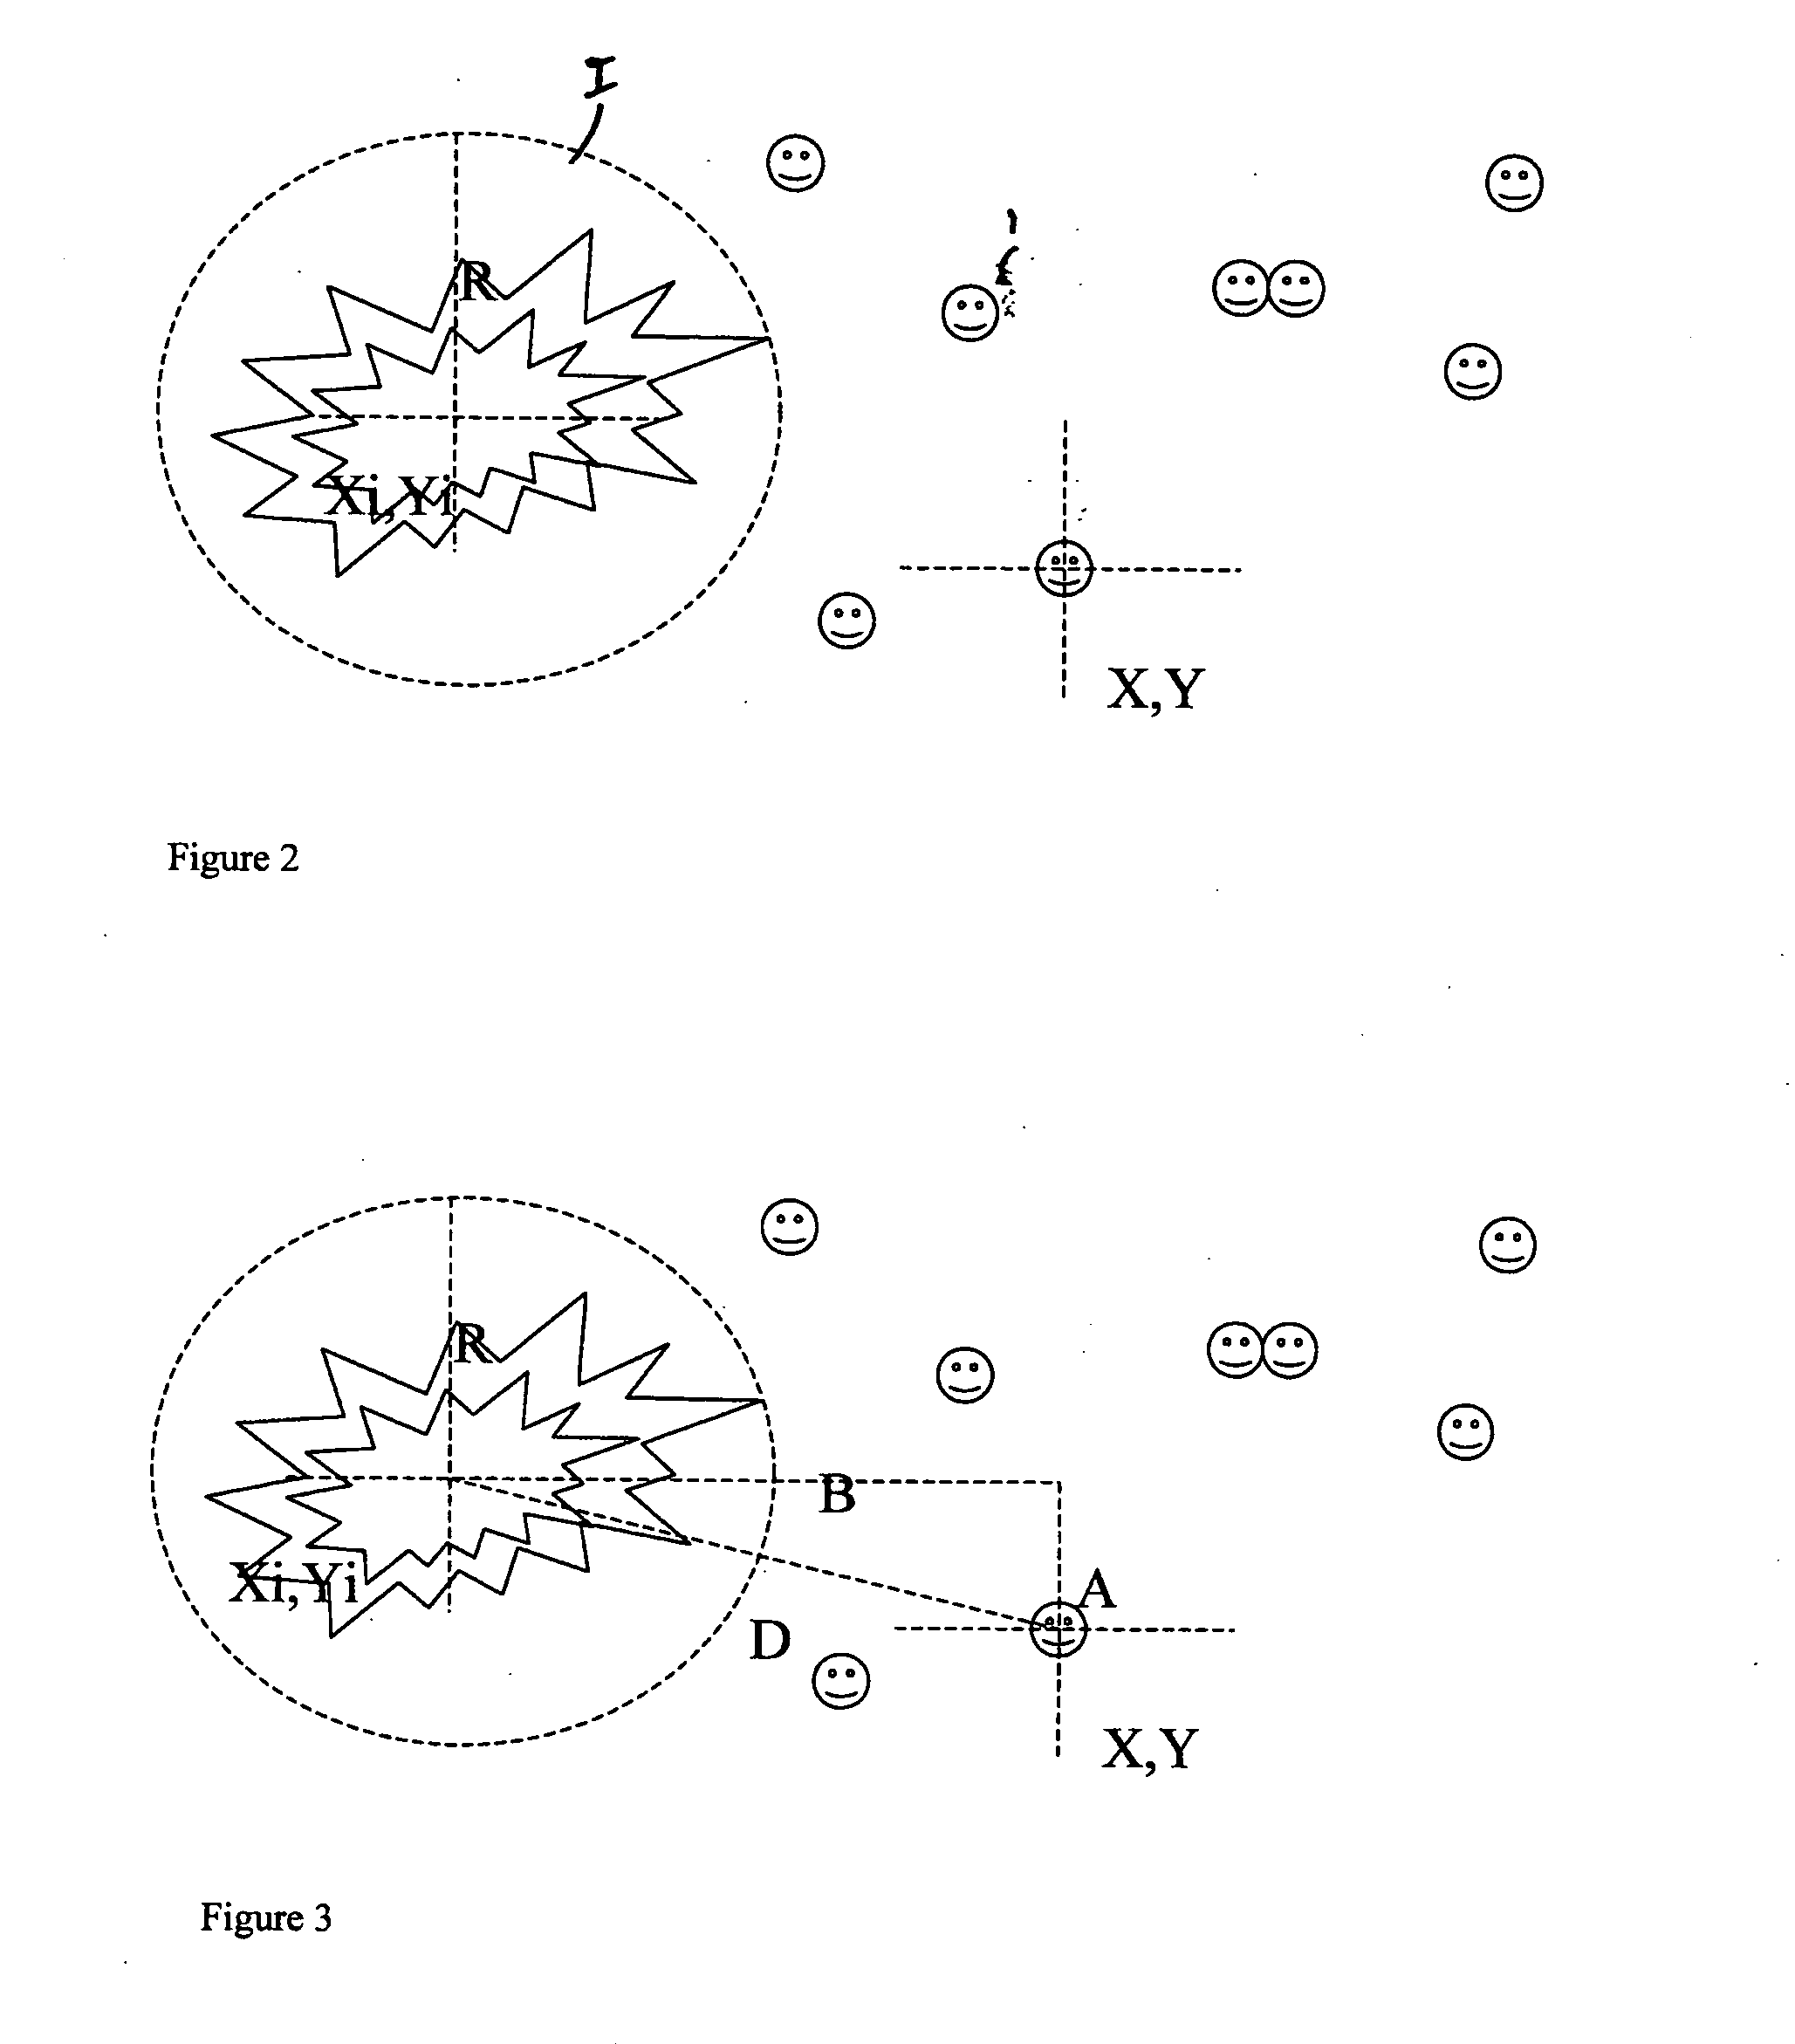 Location, tracking and alerting apparatus and method